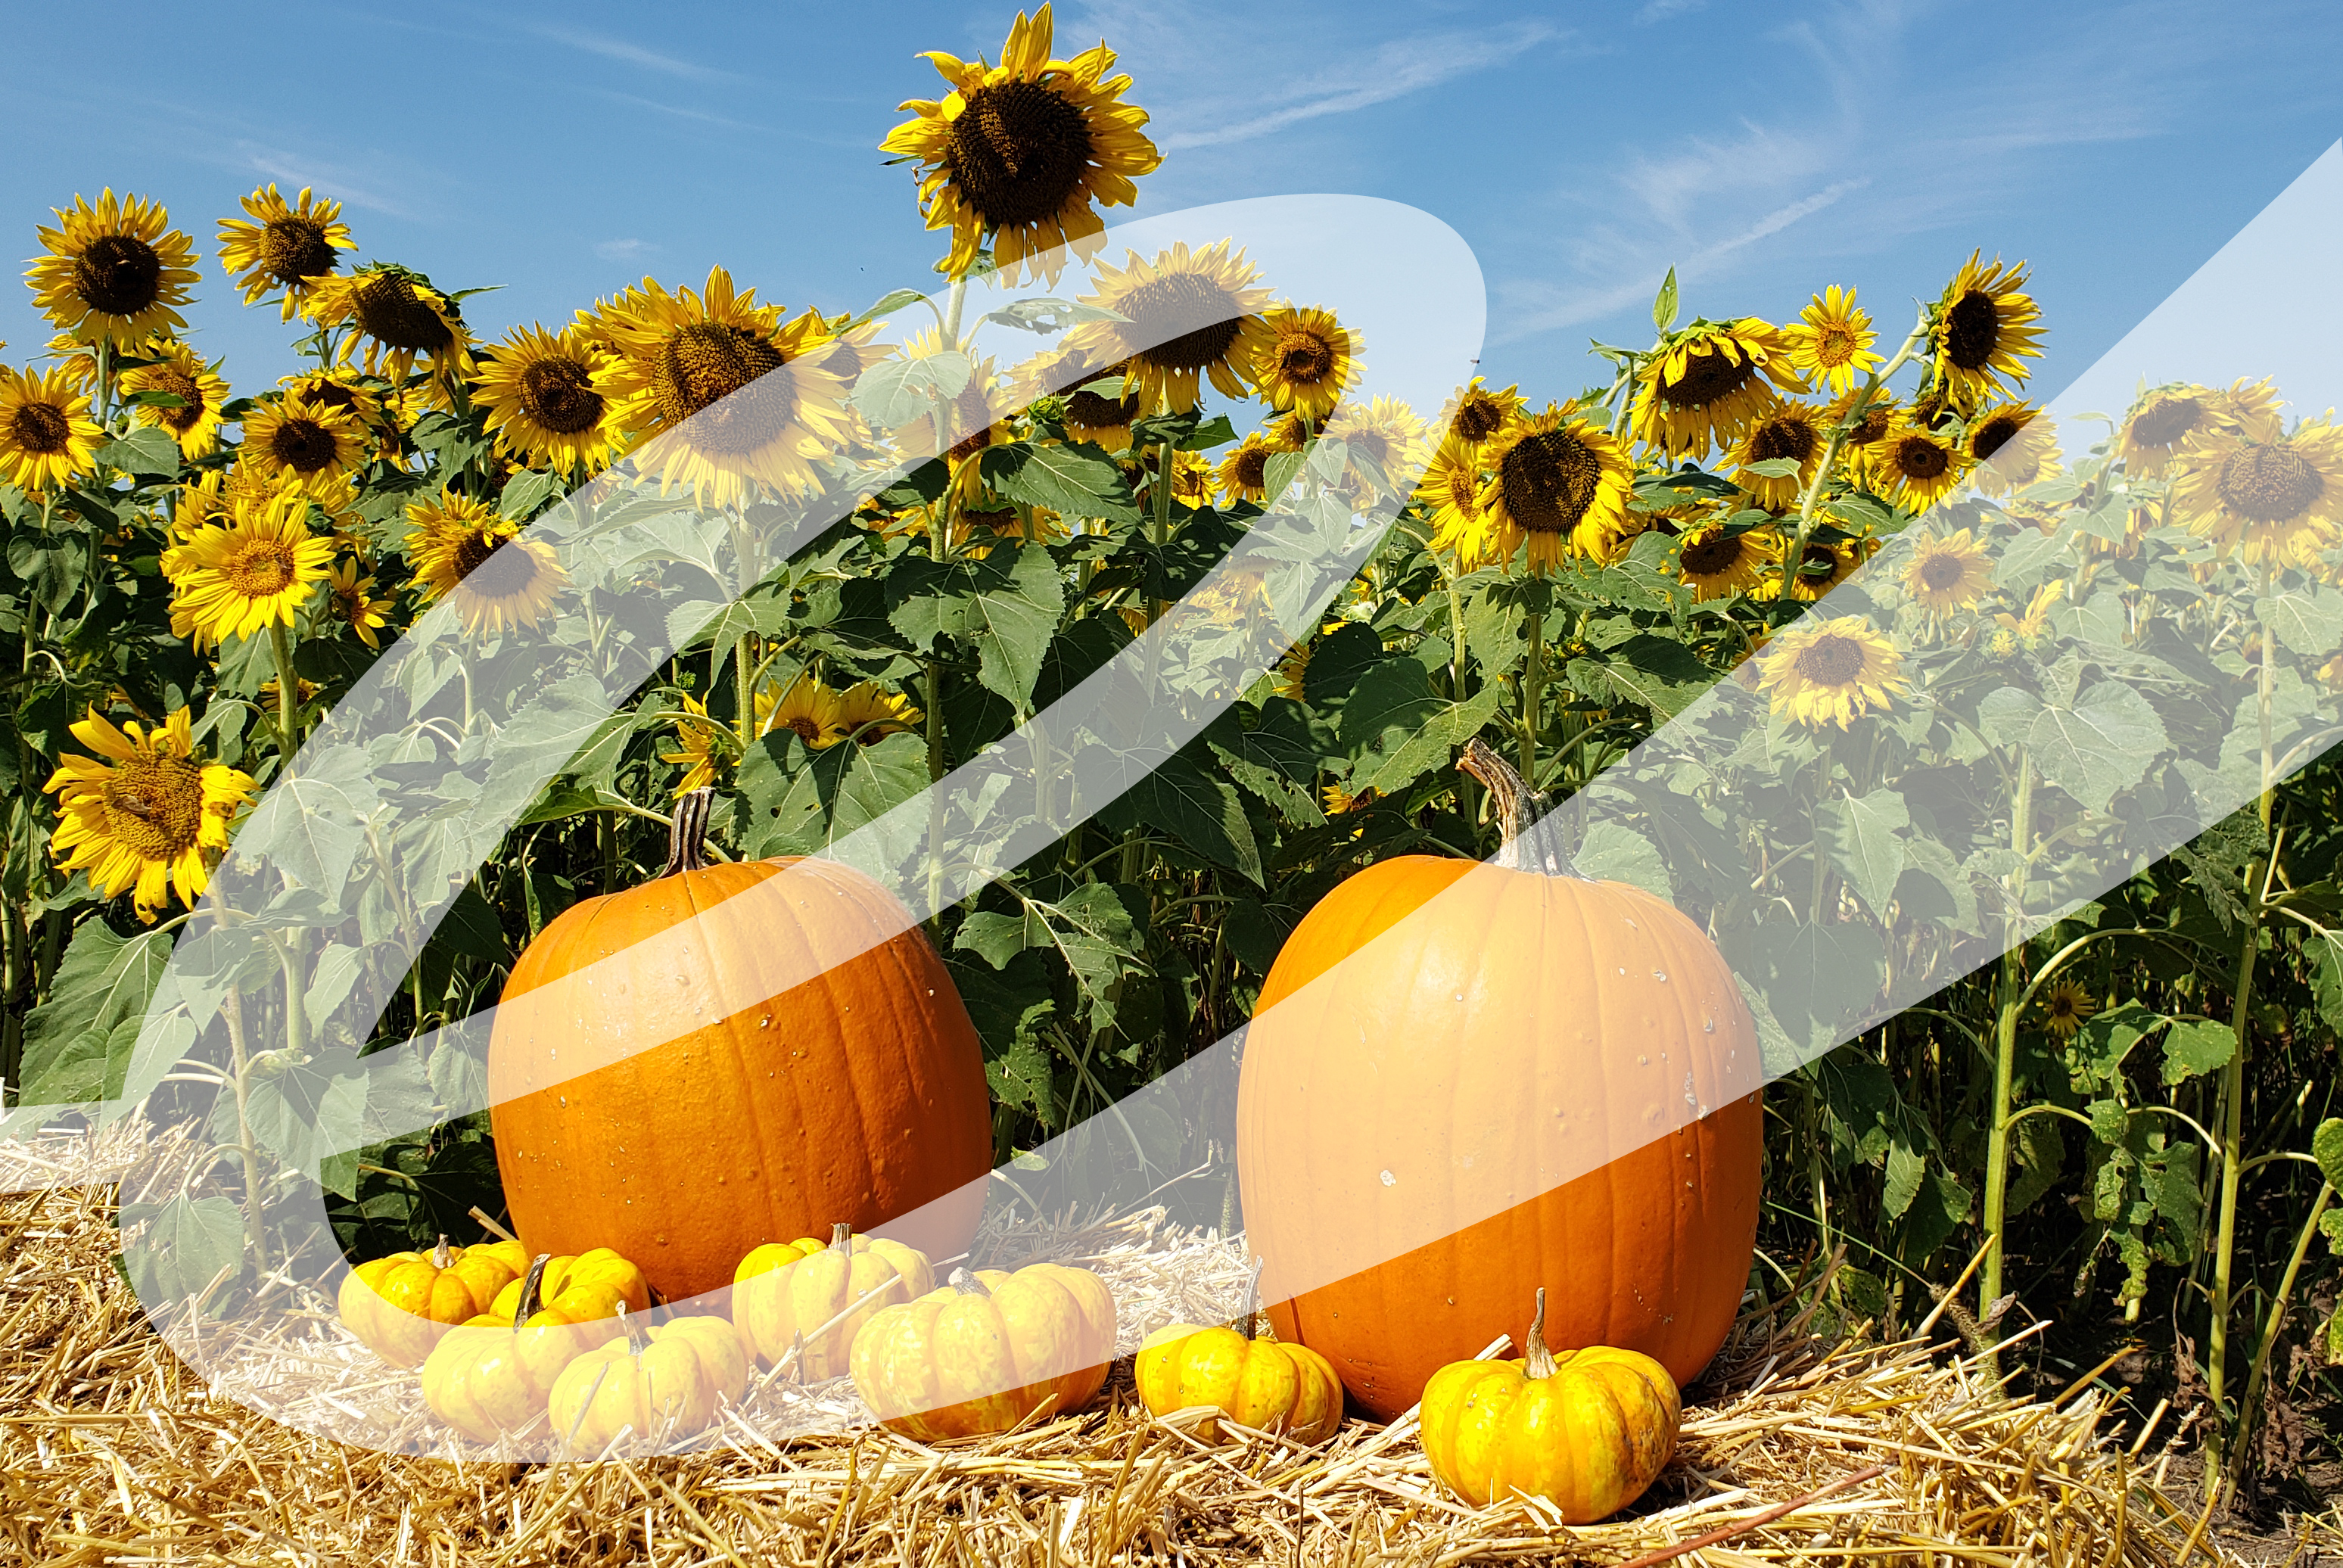 Two pumpkins in front of a sunflower patch with a semi-transparent cursive "e" layered on top of the image.